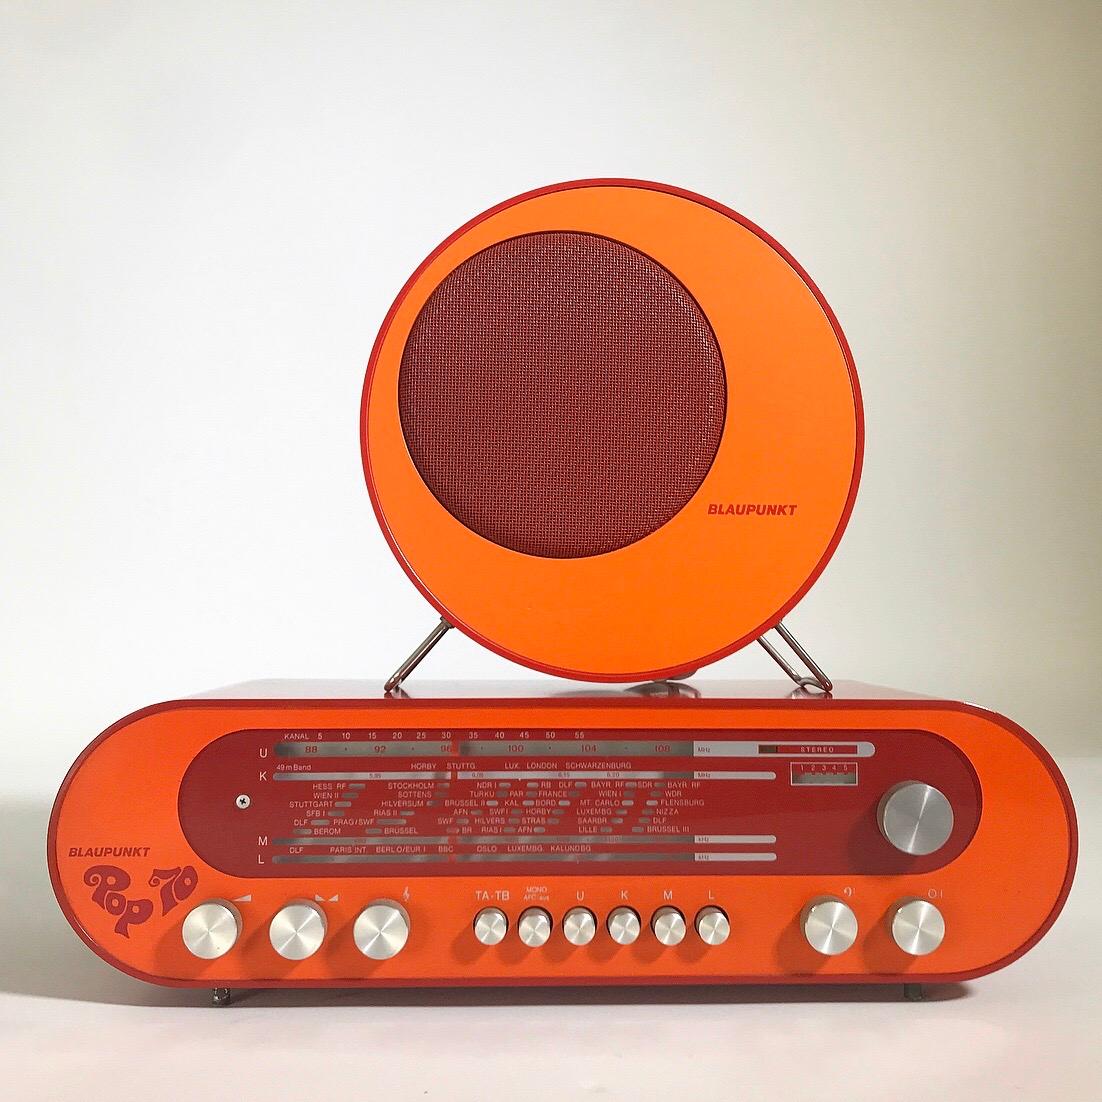 For at least seven years we have been on the outlook for this extremely rare piece of german design and finally we found this beautiful POP 70 radio system. 

The system was designed by Hans Vagt and Peter Bannert for Blaupunkt in 1969. A tribute